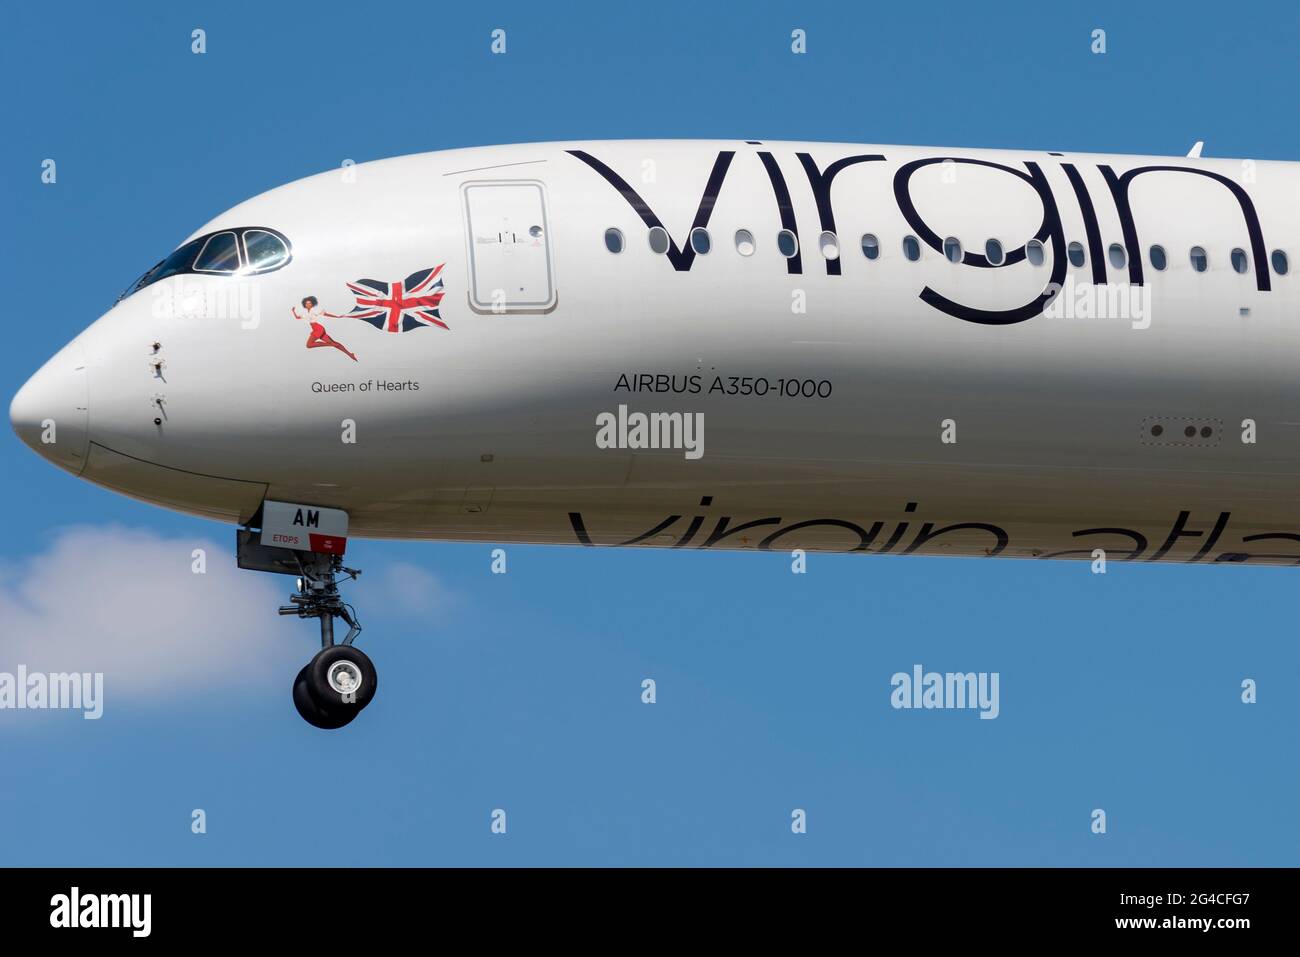 Virgin Atlantic Airbus A350 airliner jet plane G-VJAM named Queen of Hearts coming in on finals to land at London Heathrow Airport, UK. Nose art Stock Photo